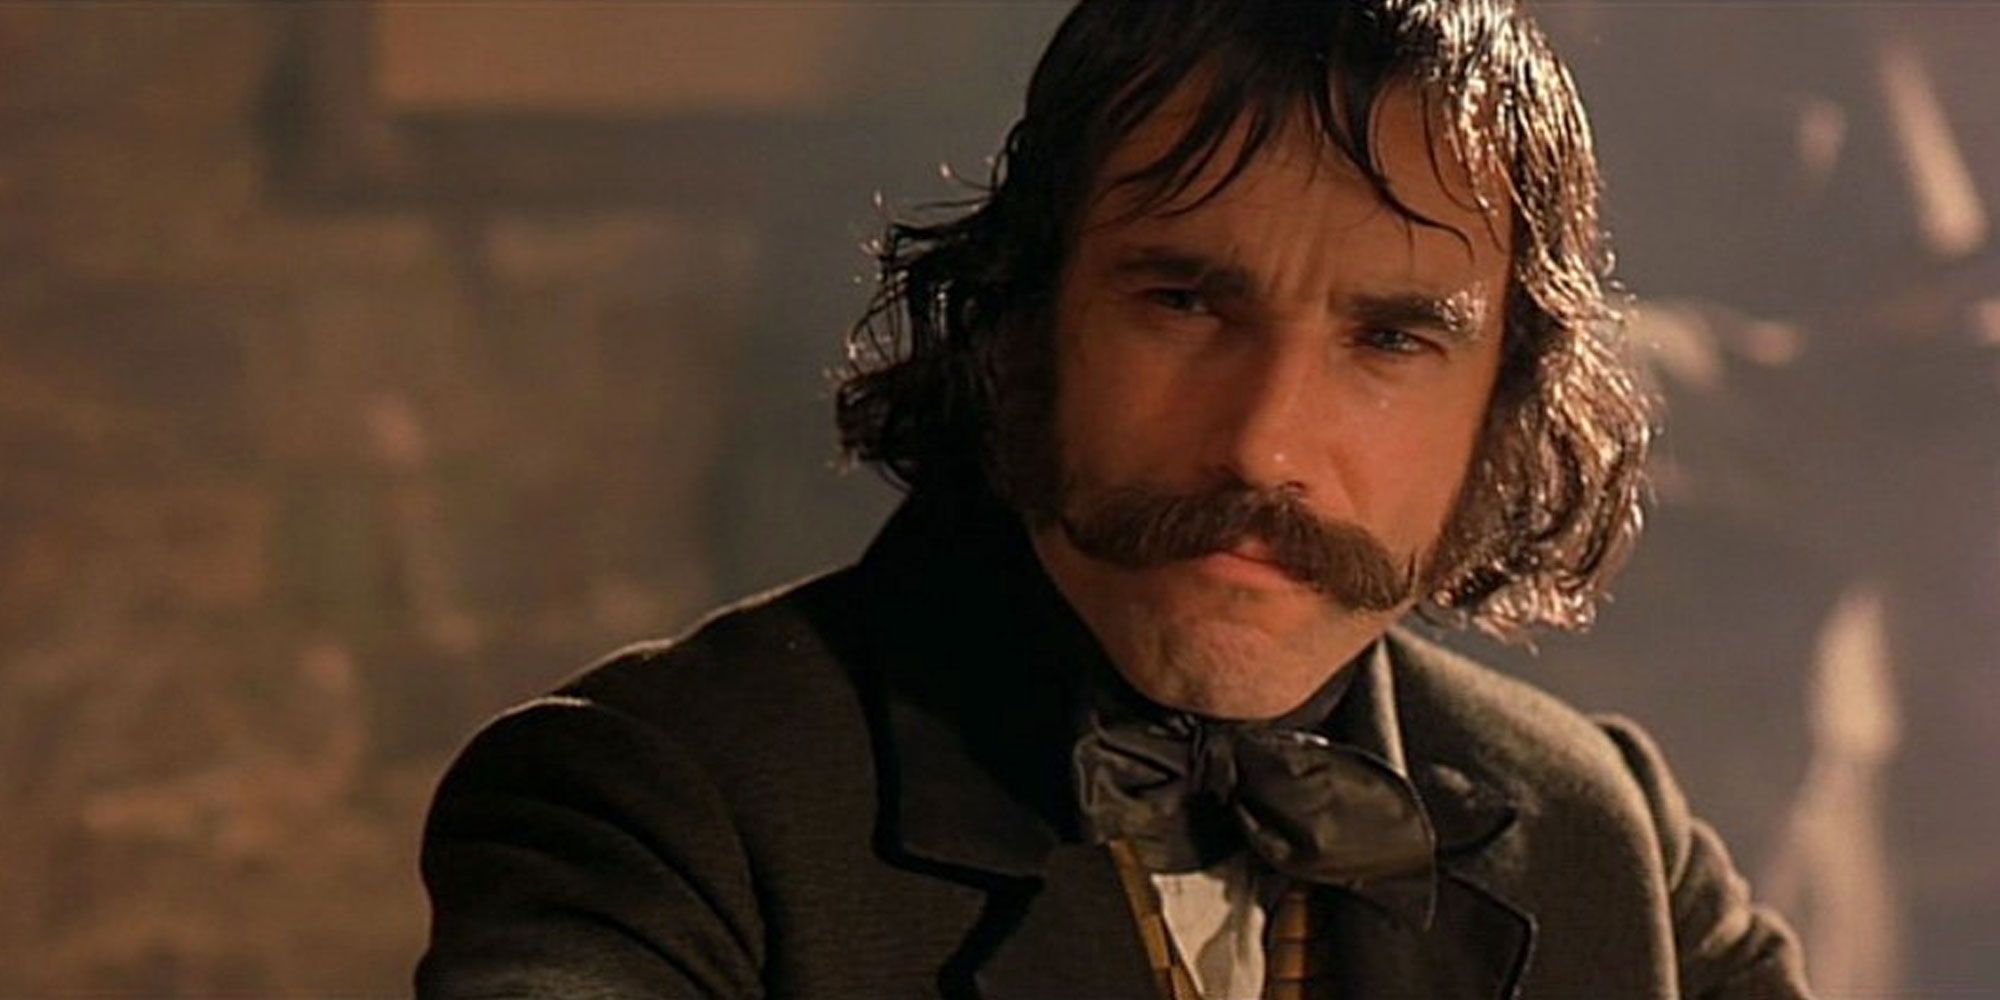 Daniel Day Lewis for Gangs of New York